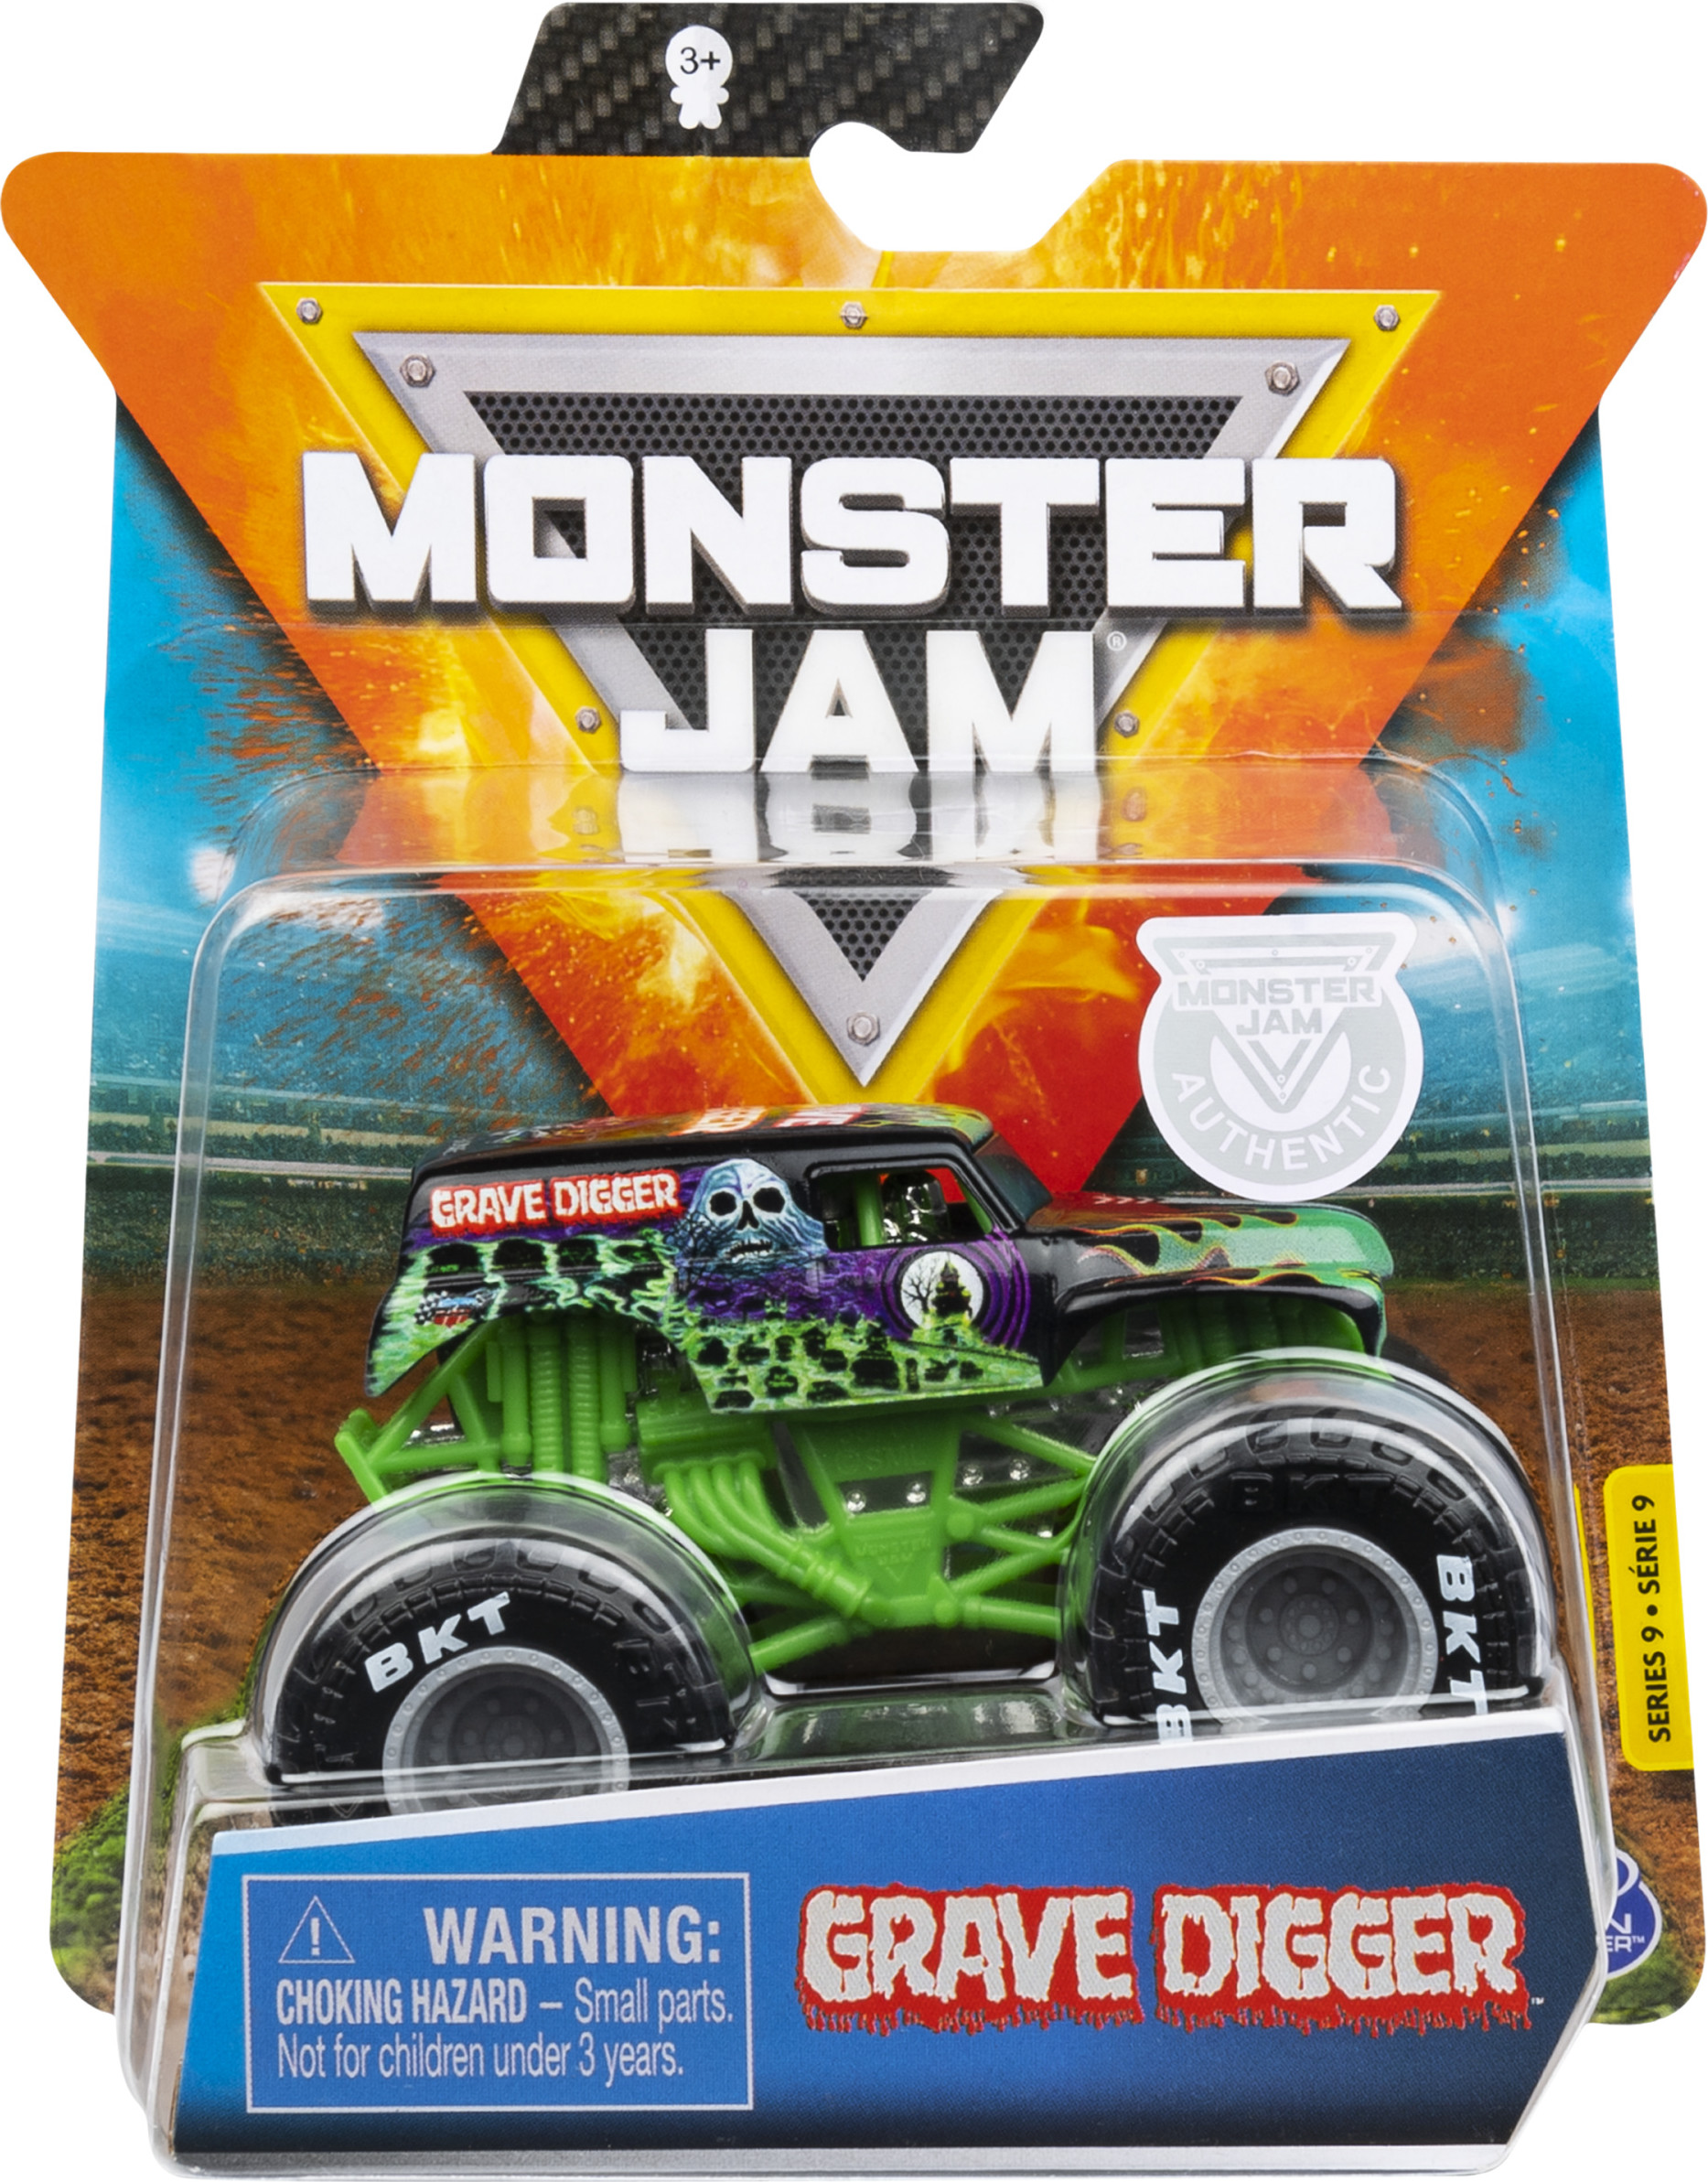 Monster Jam, Official 1:64 Scale Die-Cast Monster Truck (Styles May Vary) - image 1 of 7